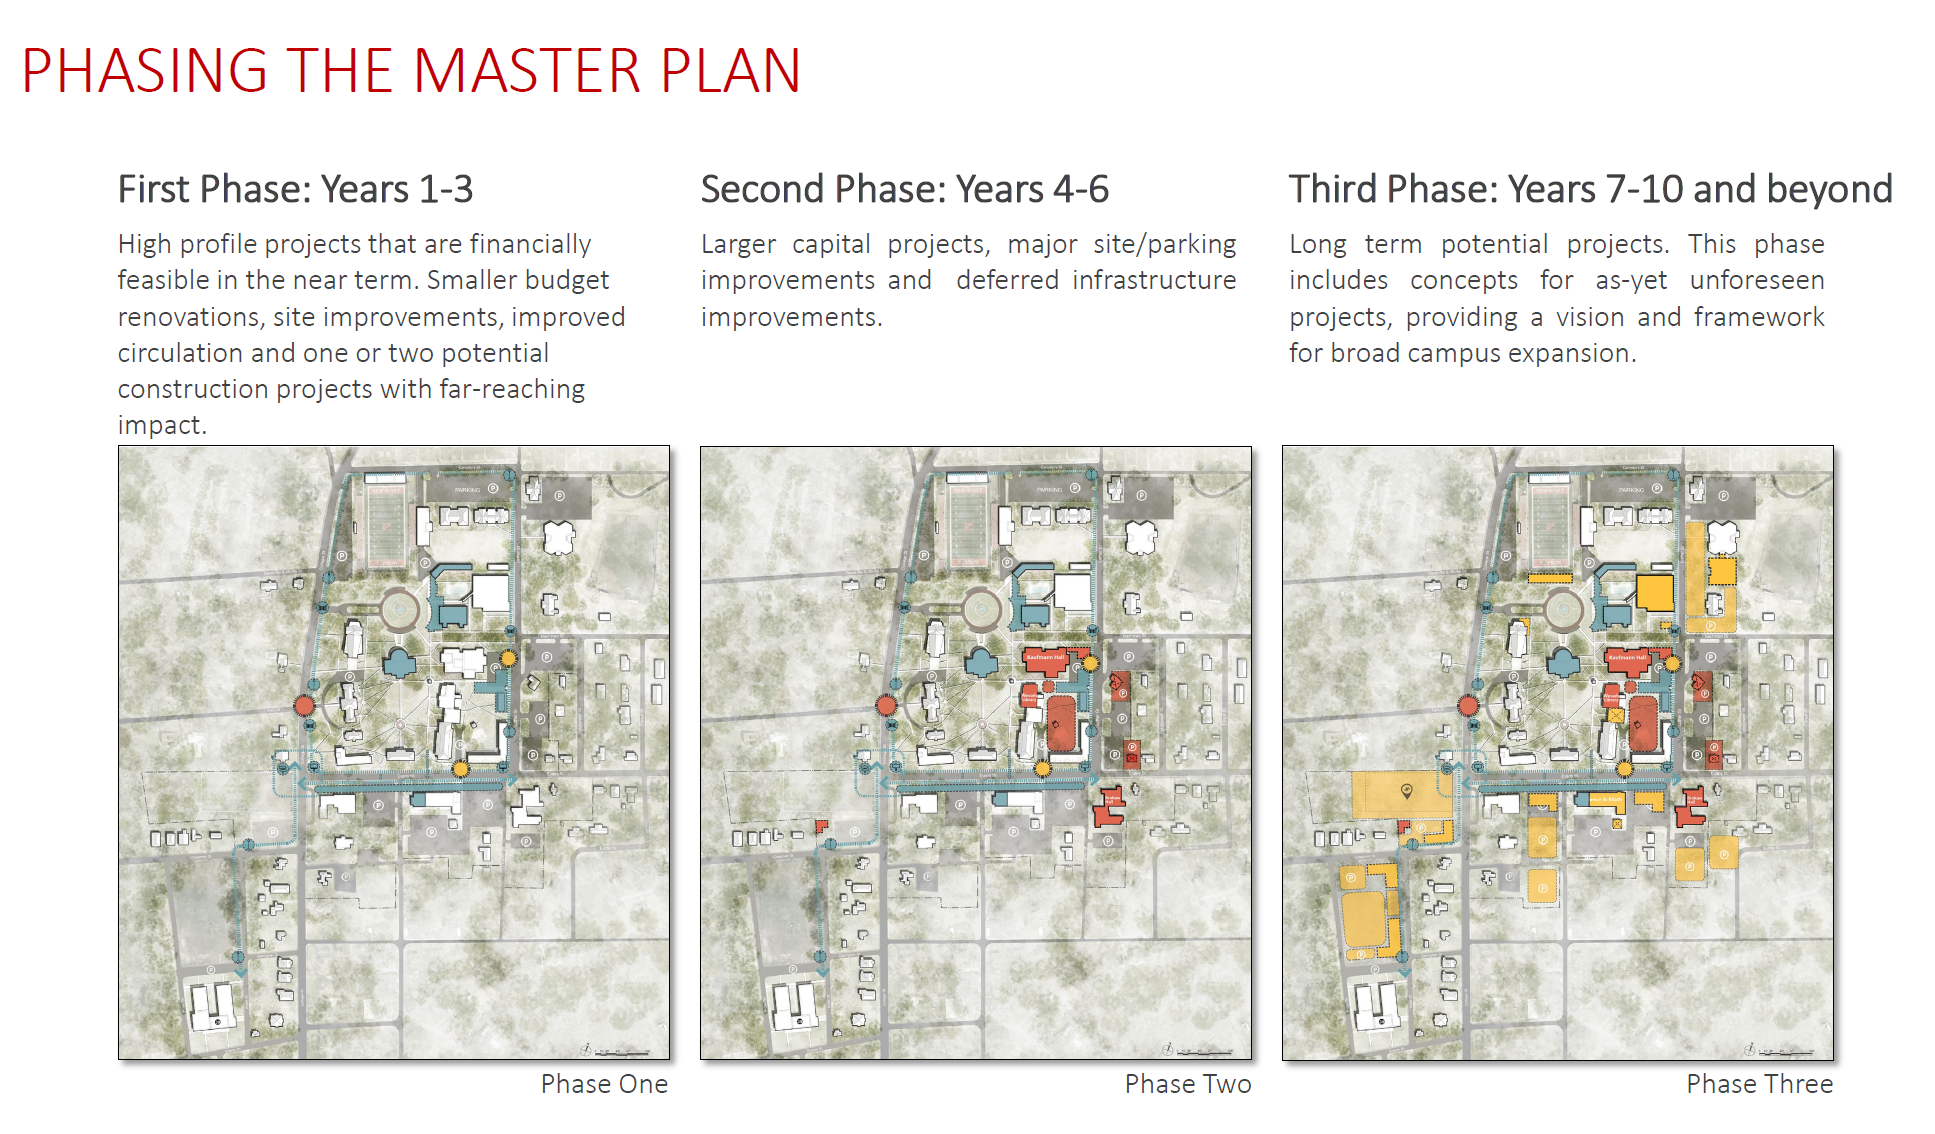 A diagram showing the first, second, and third phases of campus development and construction over the next ten years.